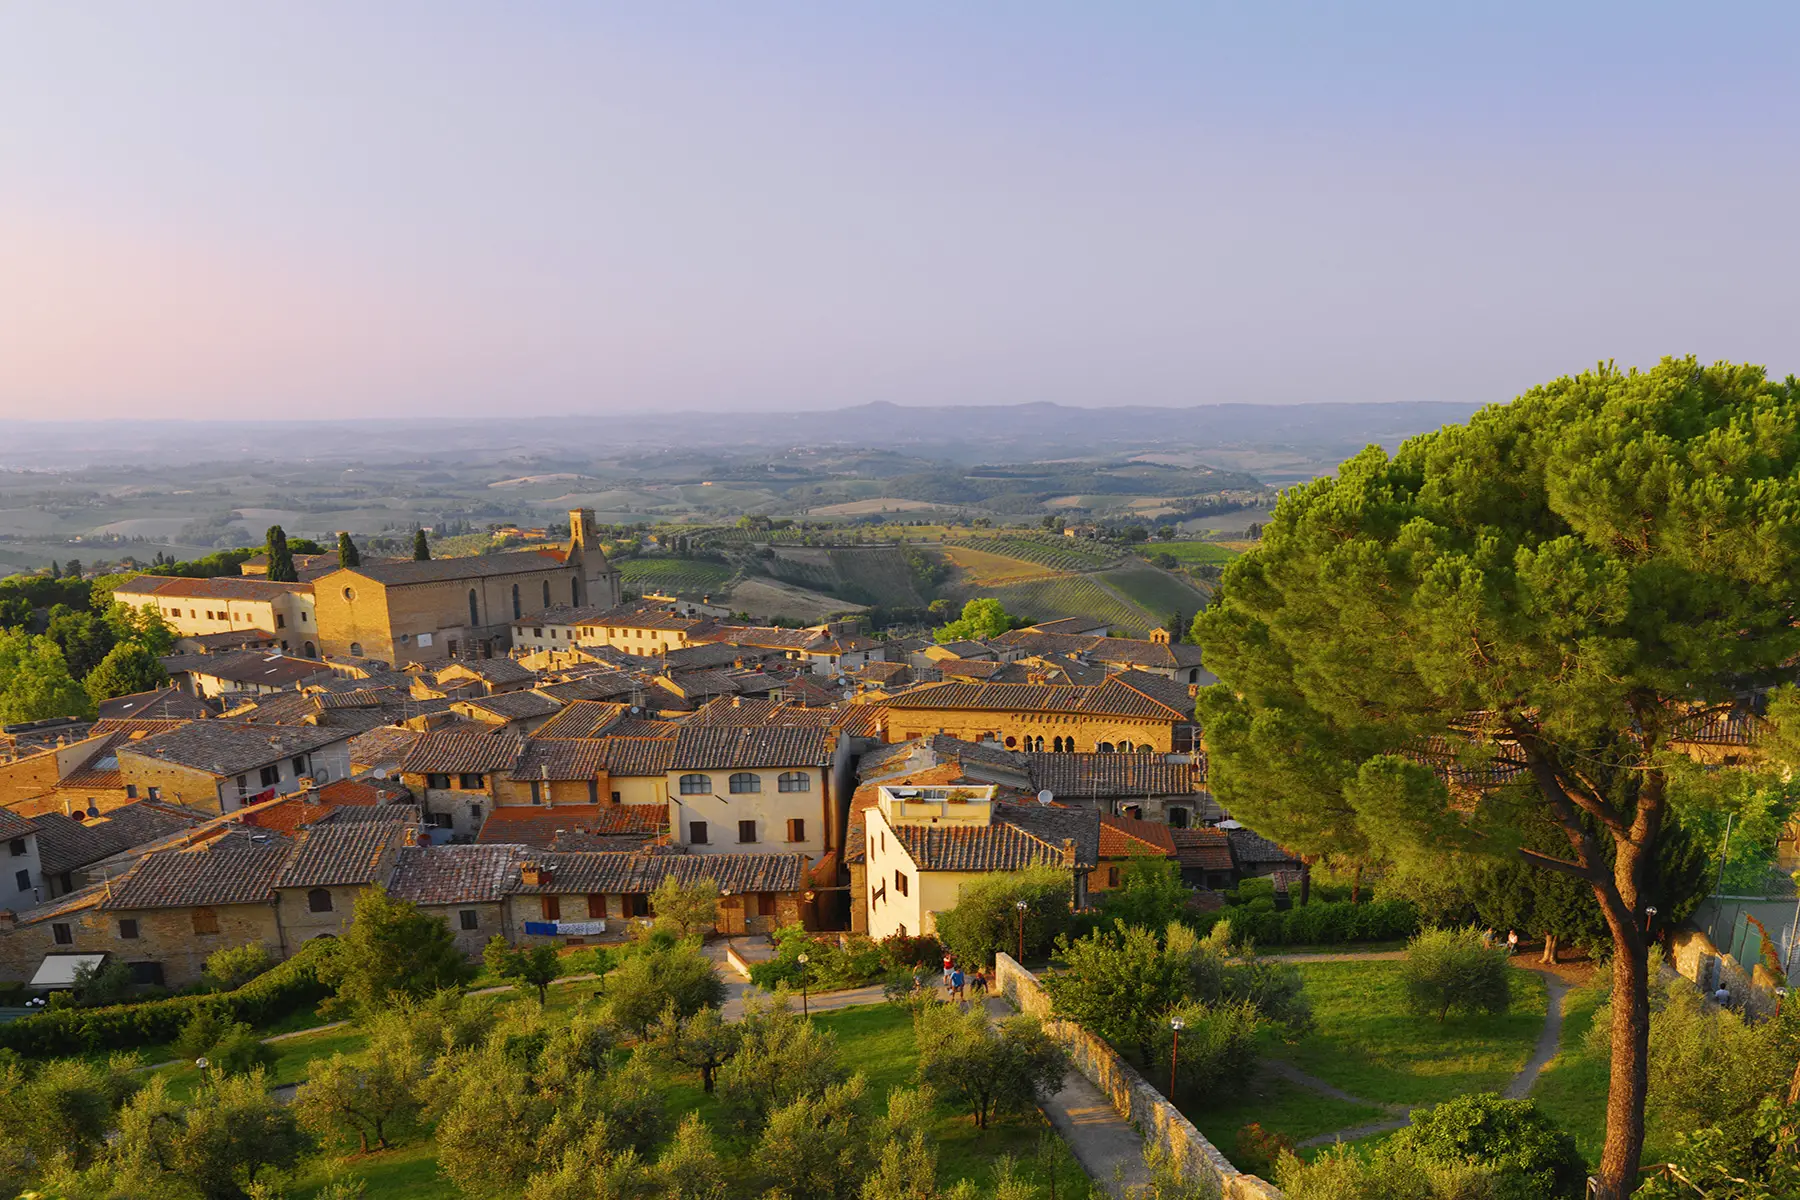 A Tuscan landscape, popular place to retire in Italy